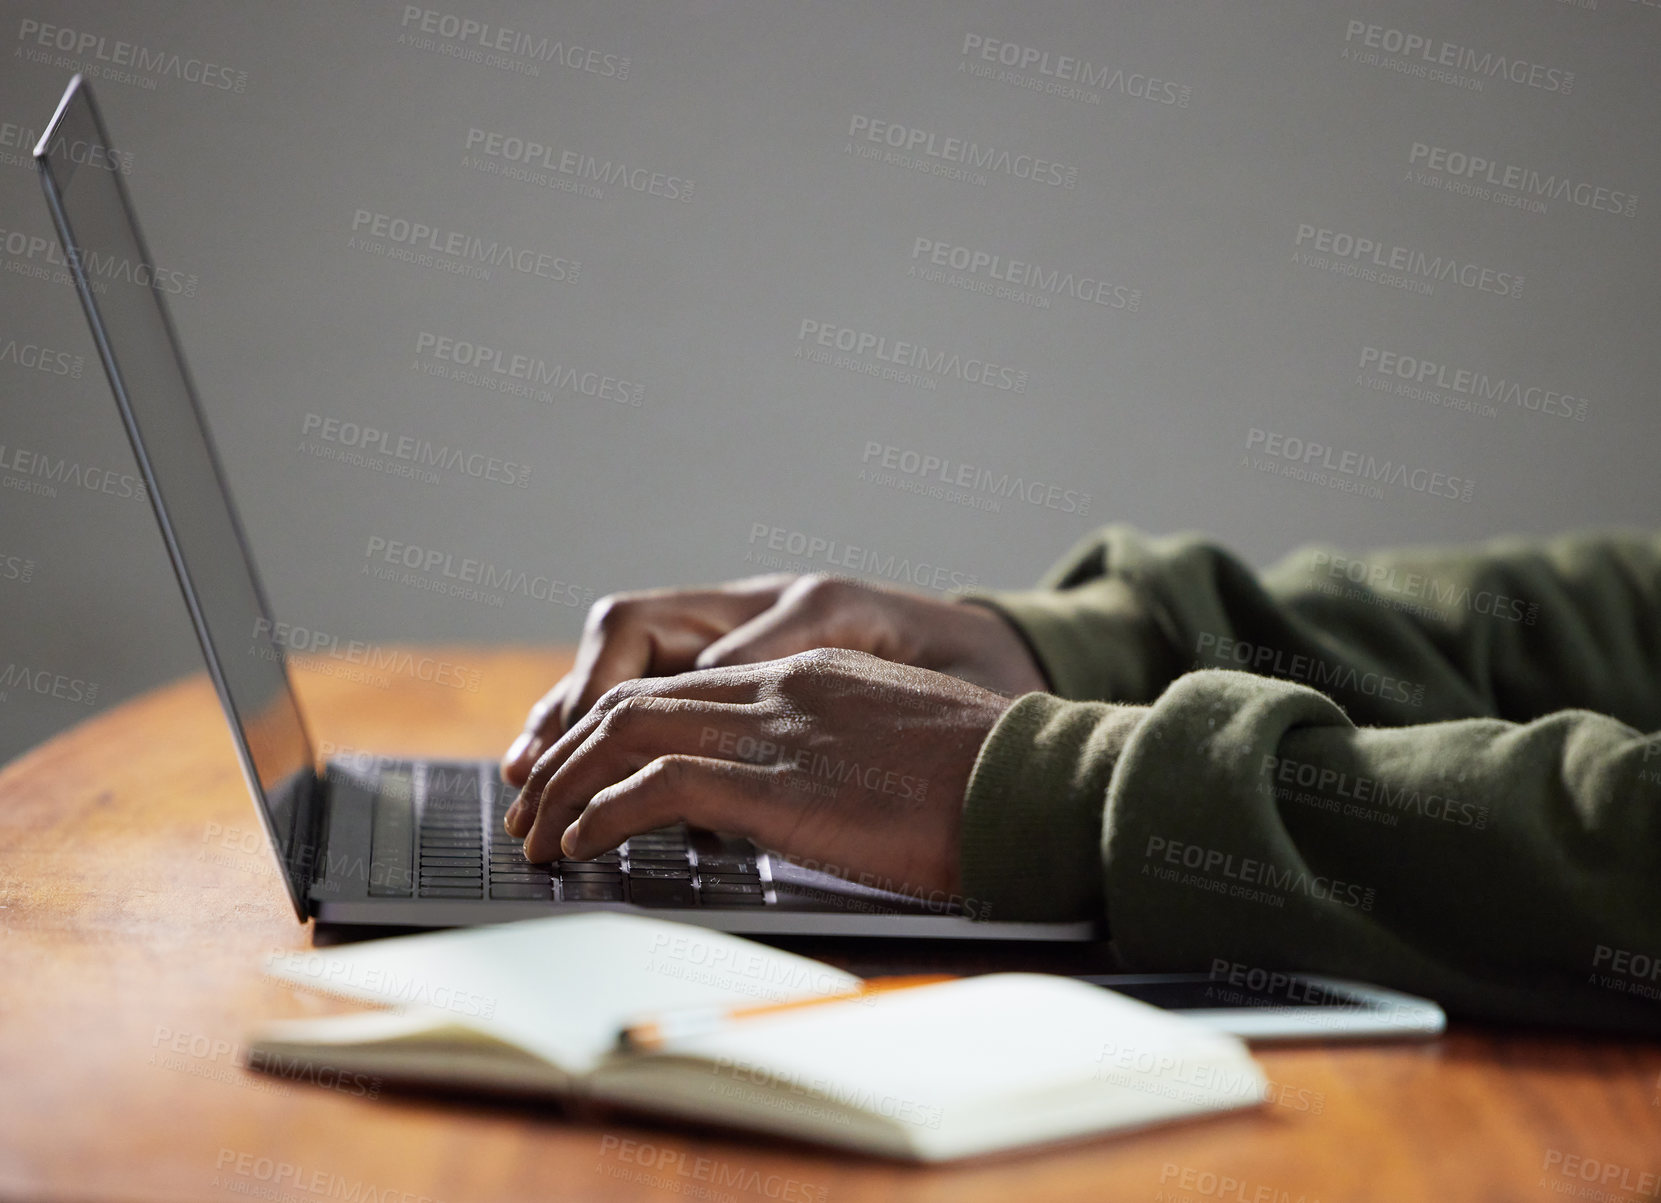 Buy stock photo Shot of an unrecognizable person using a laptop in an office